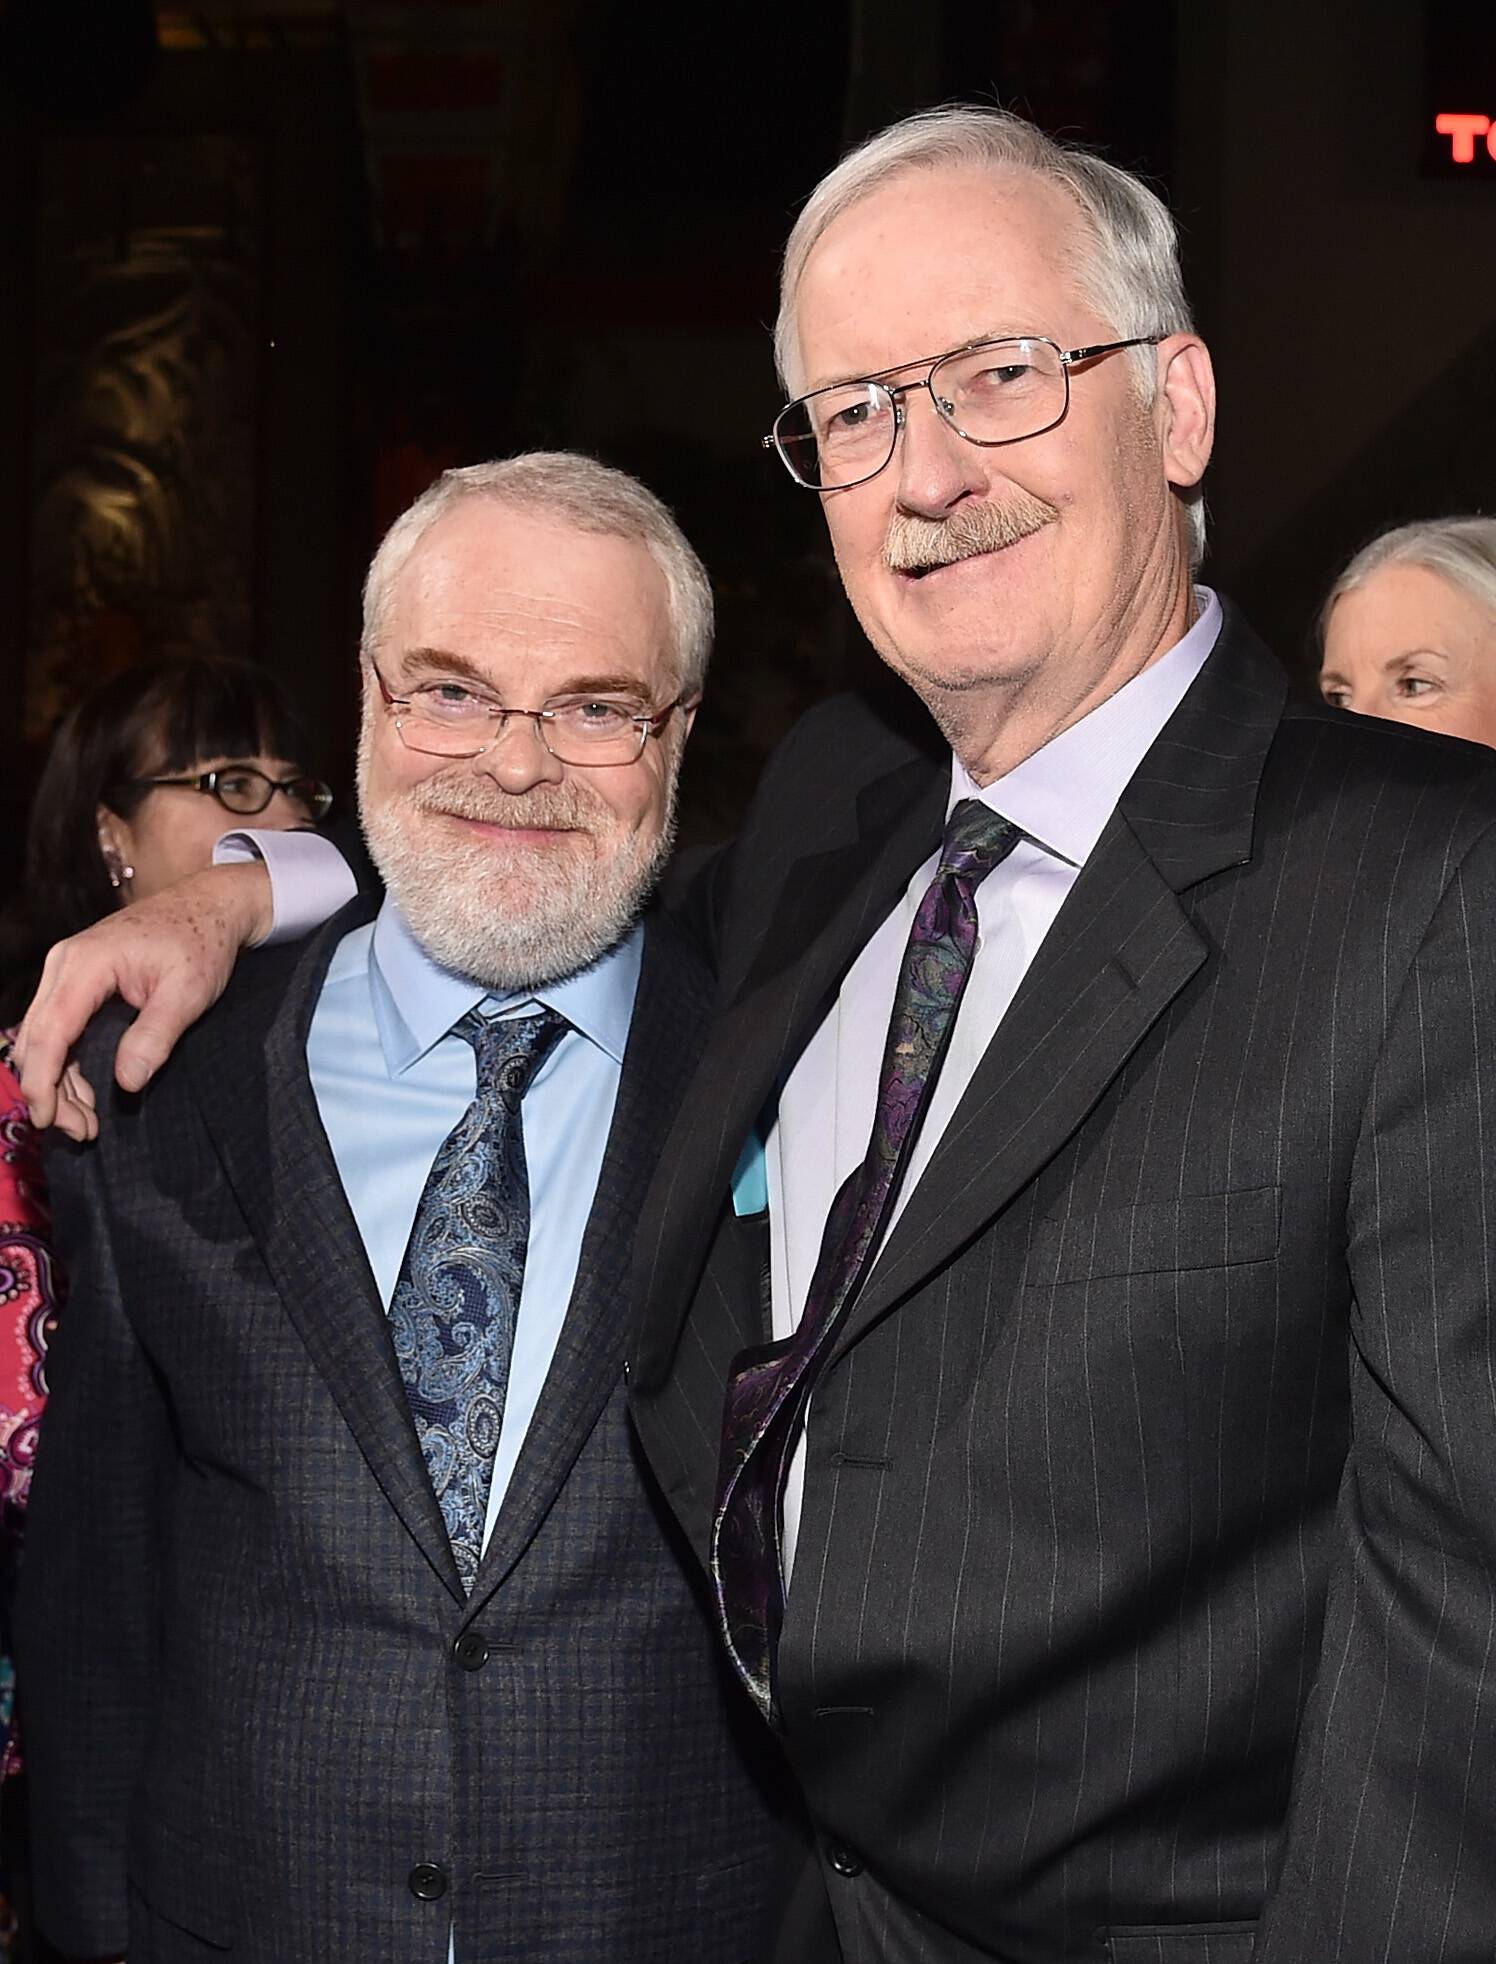 HOLLYWOOD, CA - NOVEMBER 14: Directors Ron Clements (L) and John Musker attend The World Premiere of Disneys "MOANA" at the El Capitan Theatre on Monday, November 14, 2016 in Hollywood, CA. (Photo by Alberto E. Rodriguez/Getty Images for Disney) *** Local Caption *** John Musker; Ron Clements